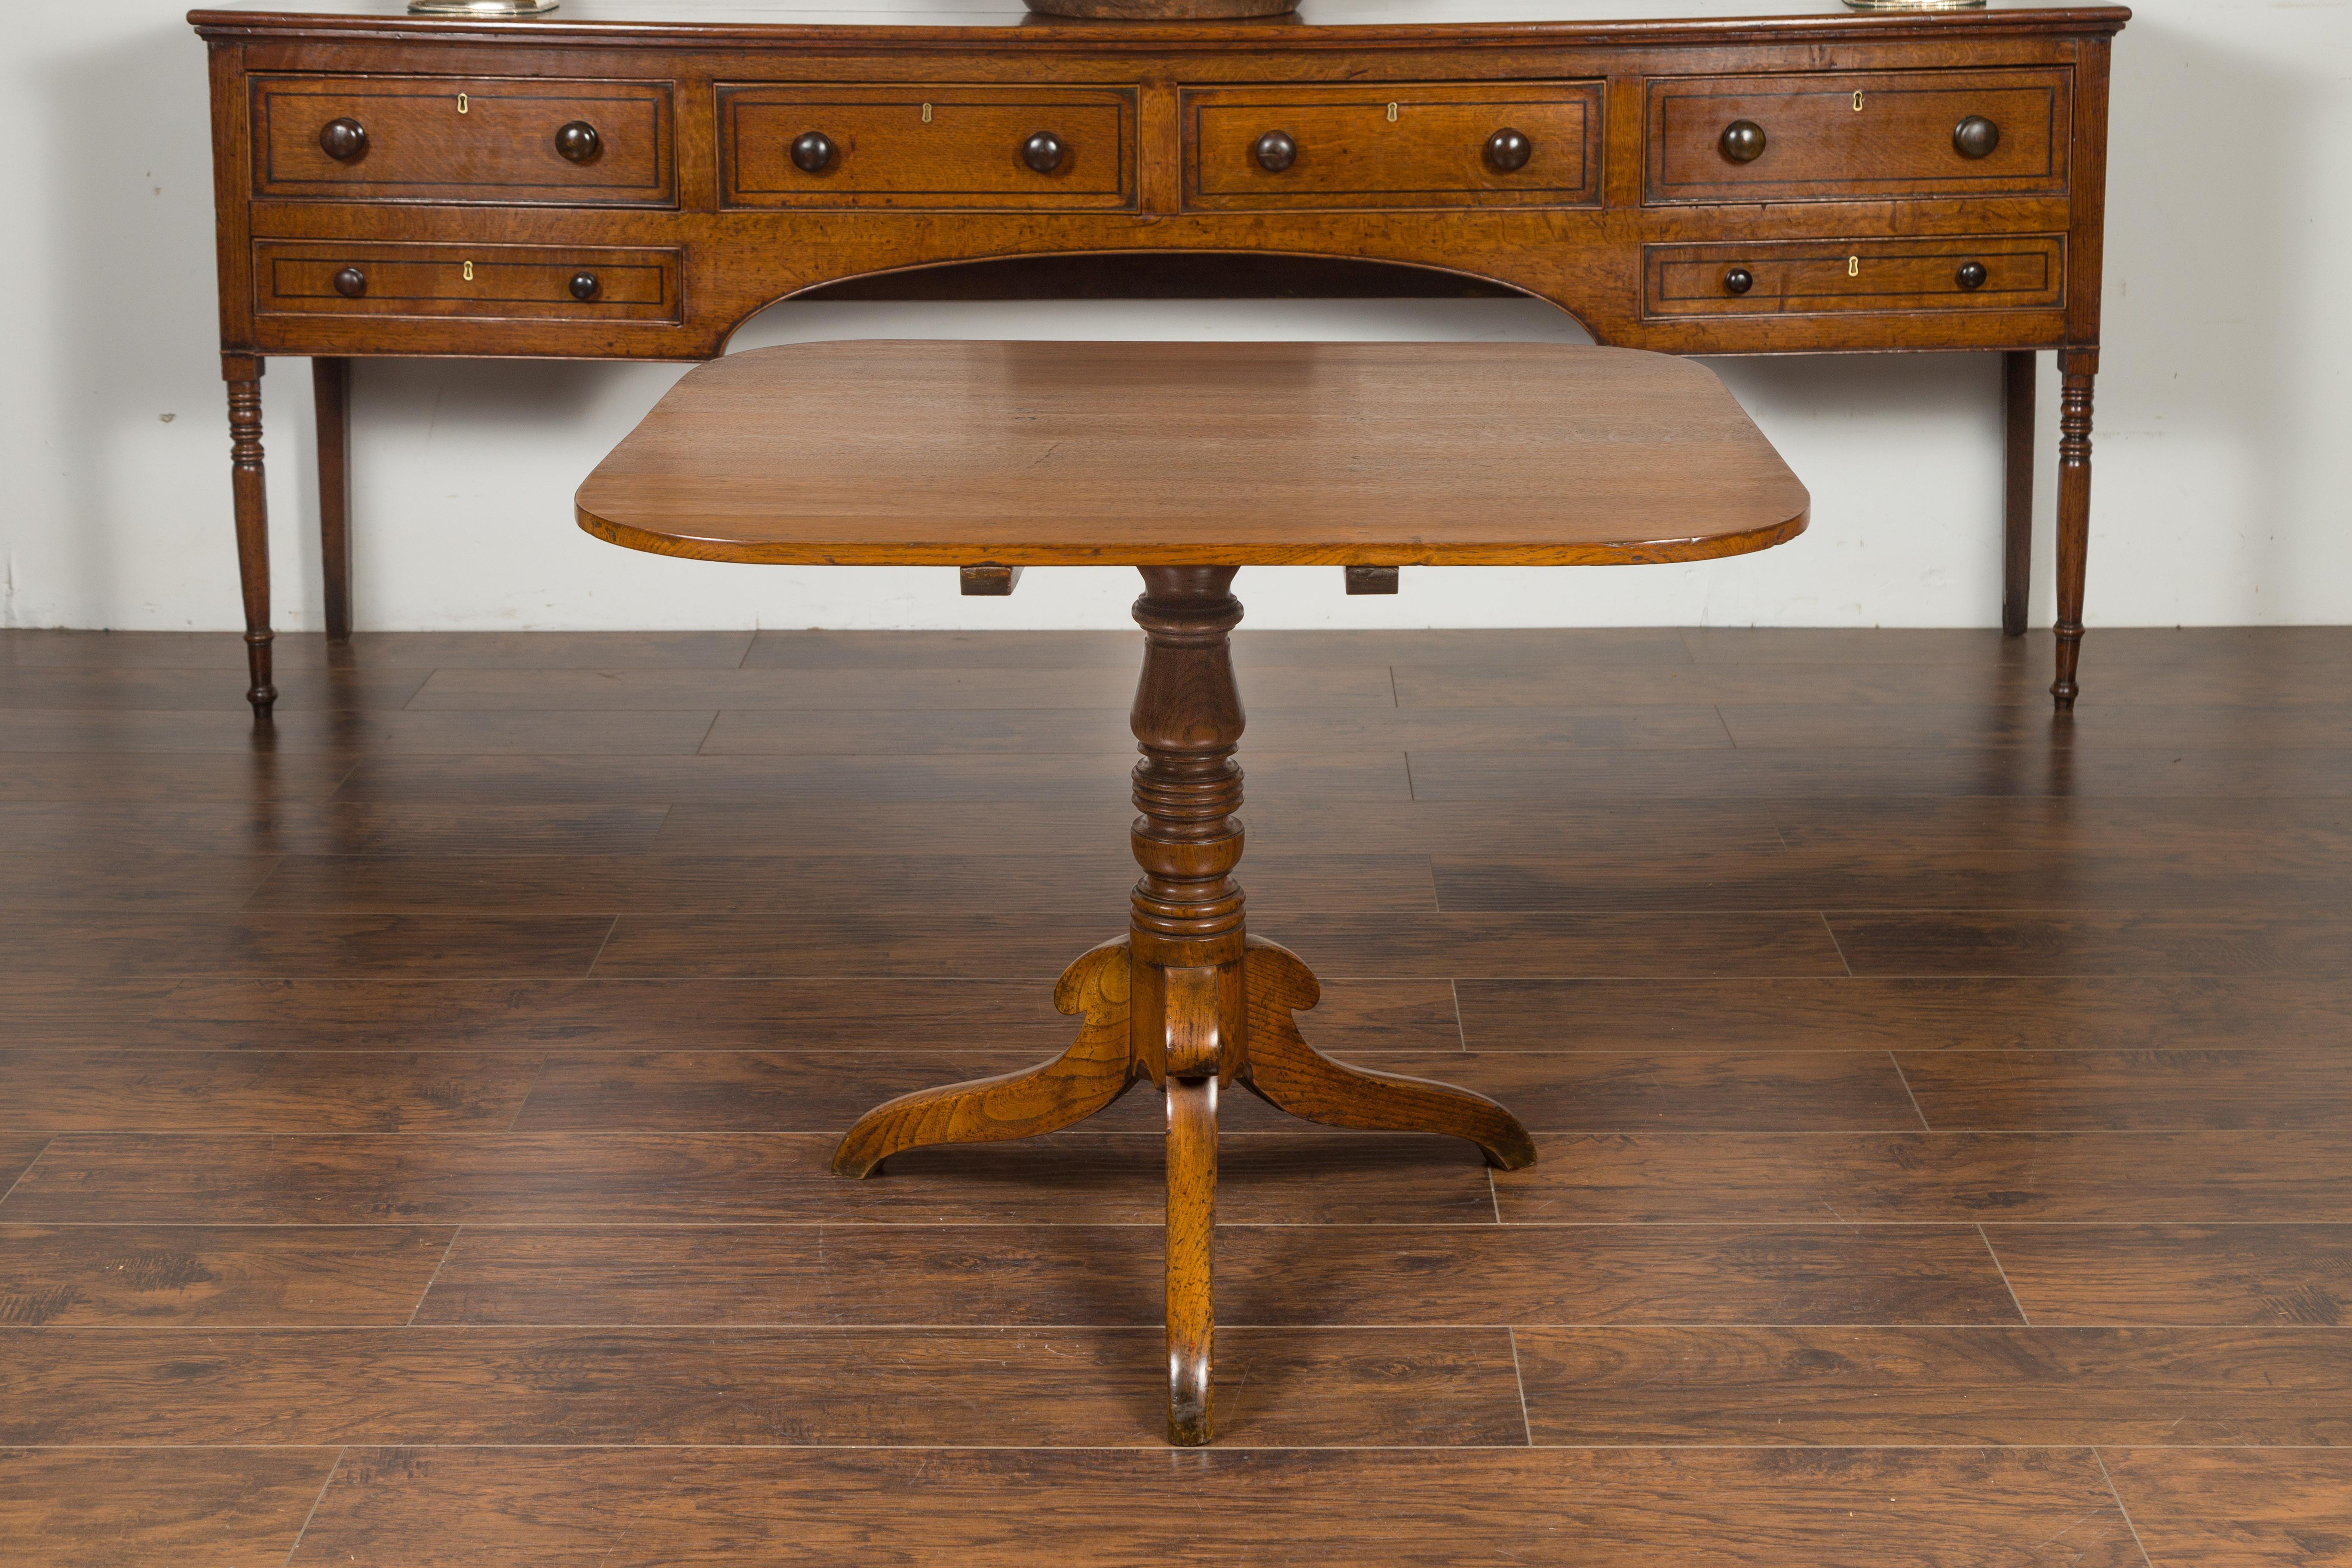 An English oak tilt-top table from the late 19th century, with pedestal tripod base. Created in England during the third quarter of the 19th century, this oak table features a rectangular tilt-top with rounded corners, sitting above a turned